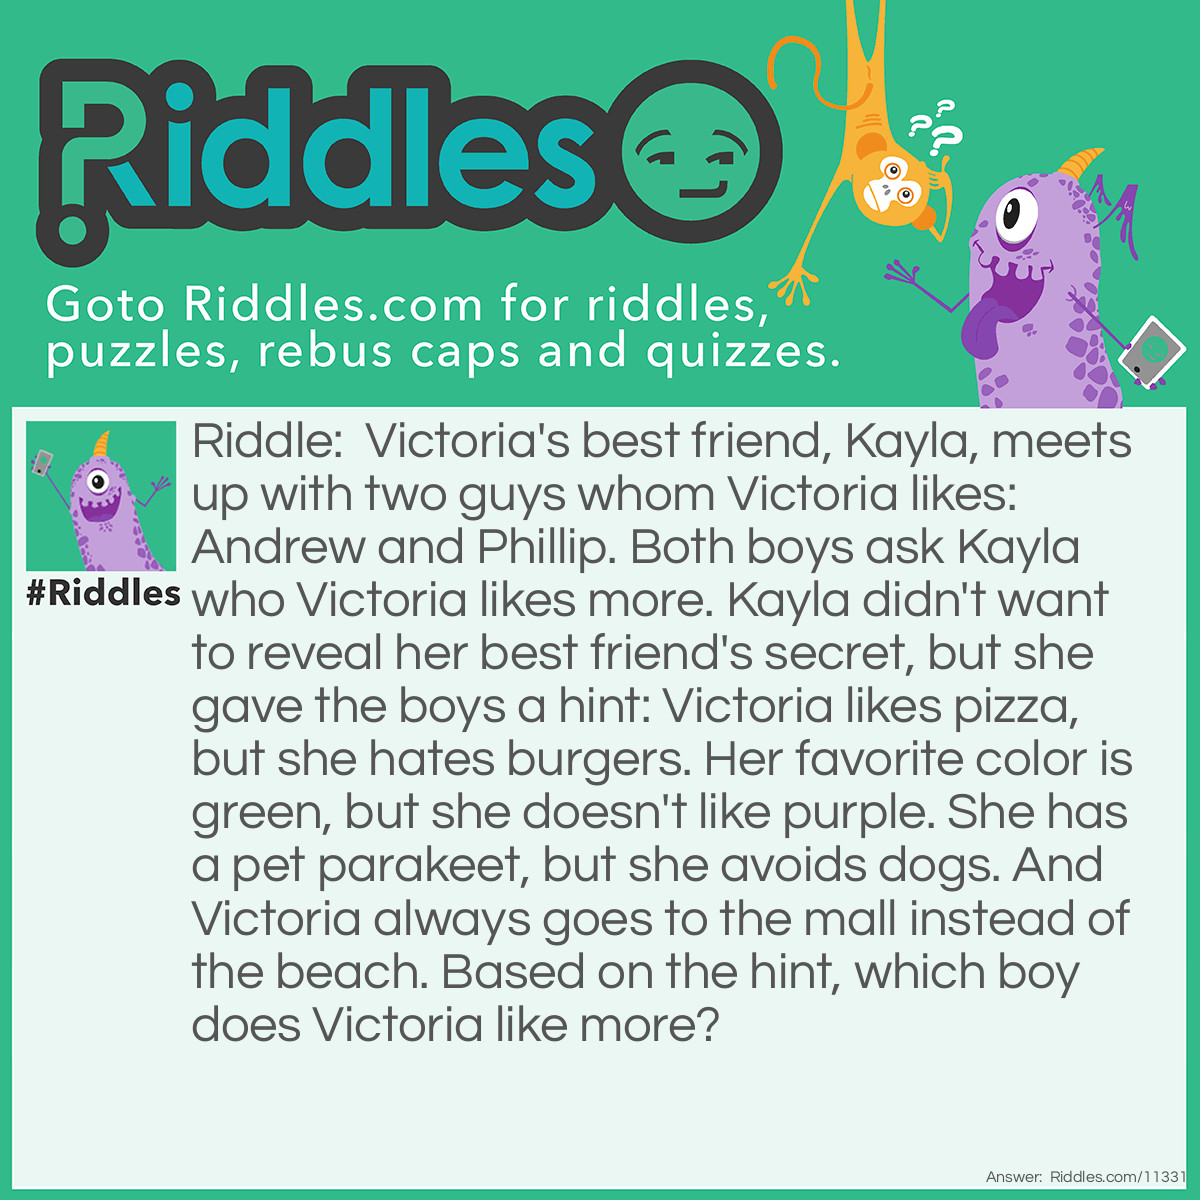 Riddle: Victoria's best friend, Kayla, meets up with two guys whom Victoria likes: Andrew and Phillip. Both boys ask Kayla who Victoria likes more. Kayla didn't want to reveal her best friend's secret, but she gave the boys a hint: Victoria likes pizza, but she hates burgers. Her favorite color is green, but she doesn't like purple. She has a pet parakeet, but she avoids dogs. And Victoria always goes to the mall instead of the beach. Based on the hint, which boy does Victoria like more? Answer: Victoria likes Phillip more than Andrew. We have to look for some pattern in the hint Kayla gave the boys. Things such as "mall", "parakeet", "green", and "pizza" contain double letters, whereas things like "beach", "dog", "purple", and "burger" do not. The name "Phillip" contains the double letter "L", but the name "Andrew" doesn't have any double letters. Therefore, Victoria likes Phillip.